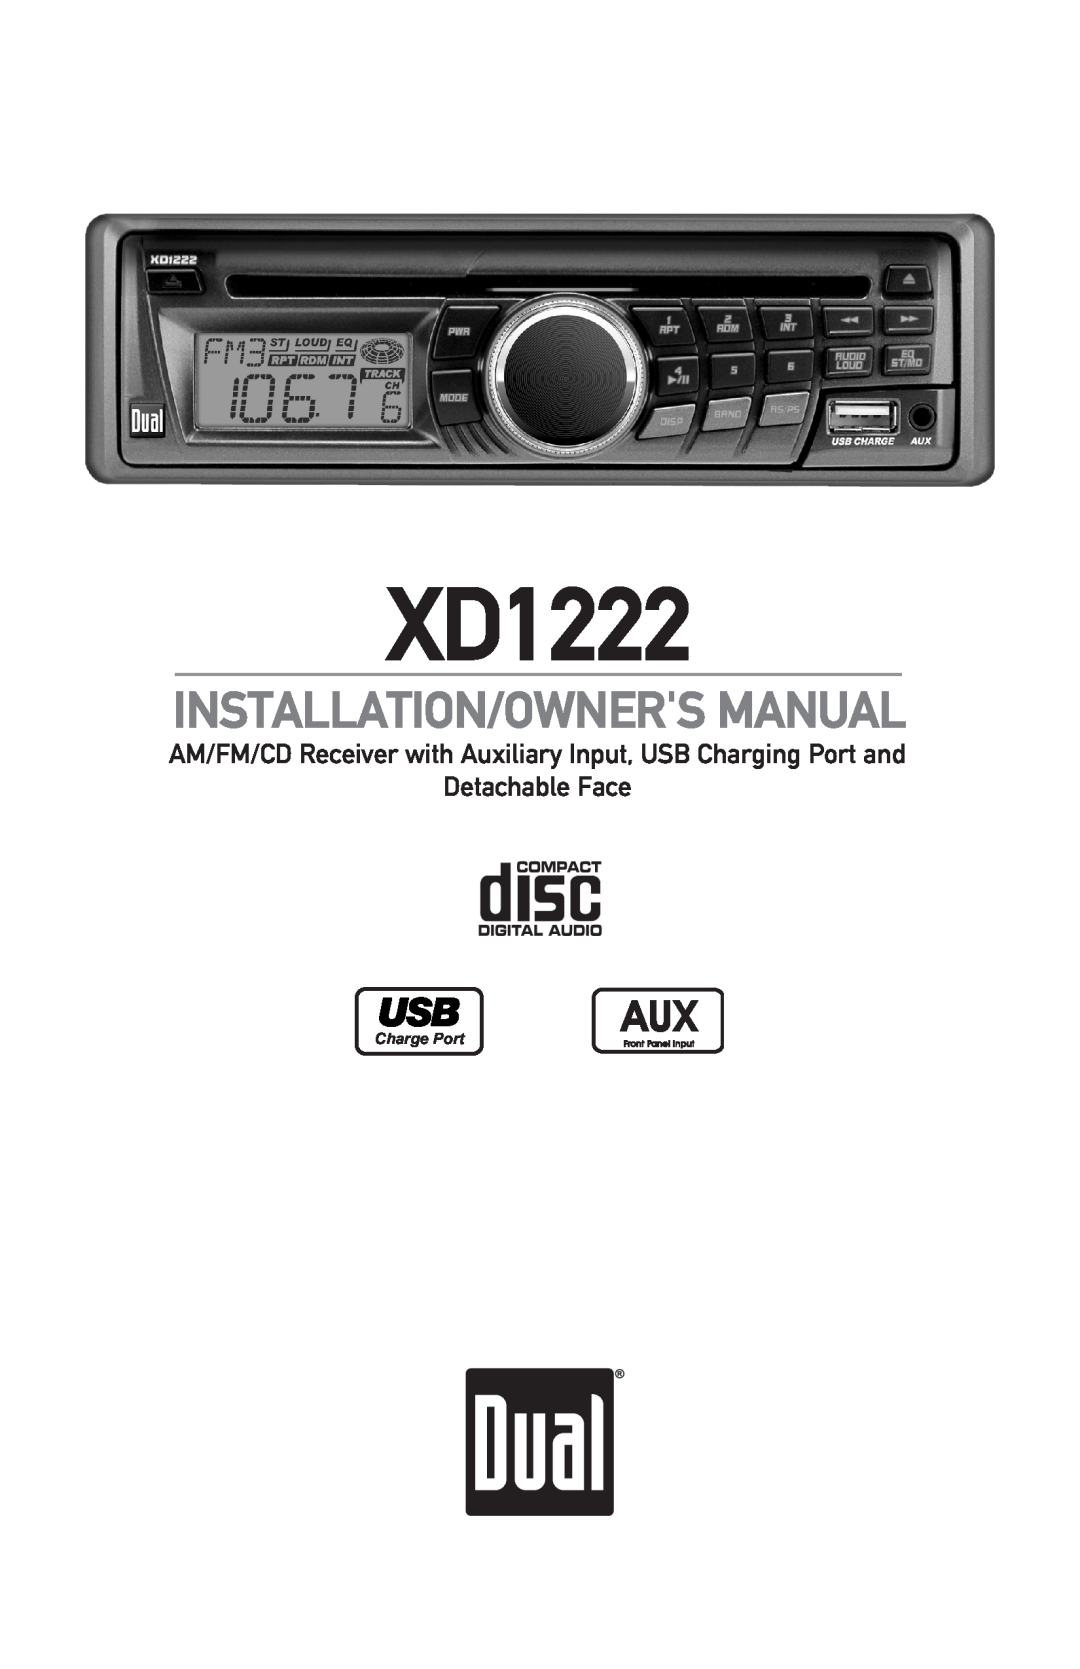 Dual XD1222 owner manual Installation/Owners Manual, Detachable Face, Charge Port 